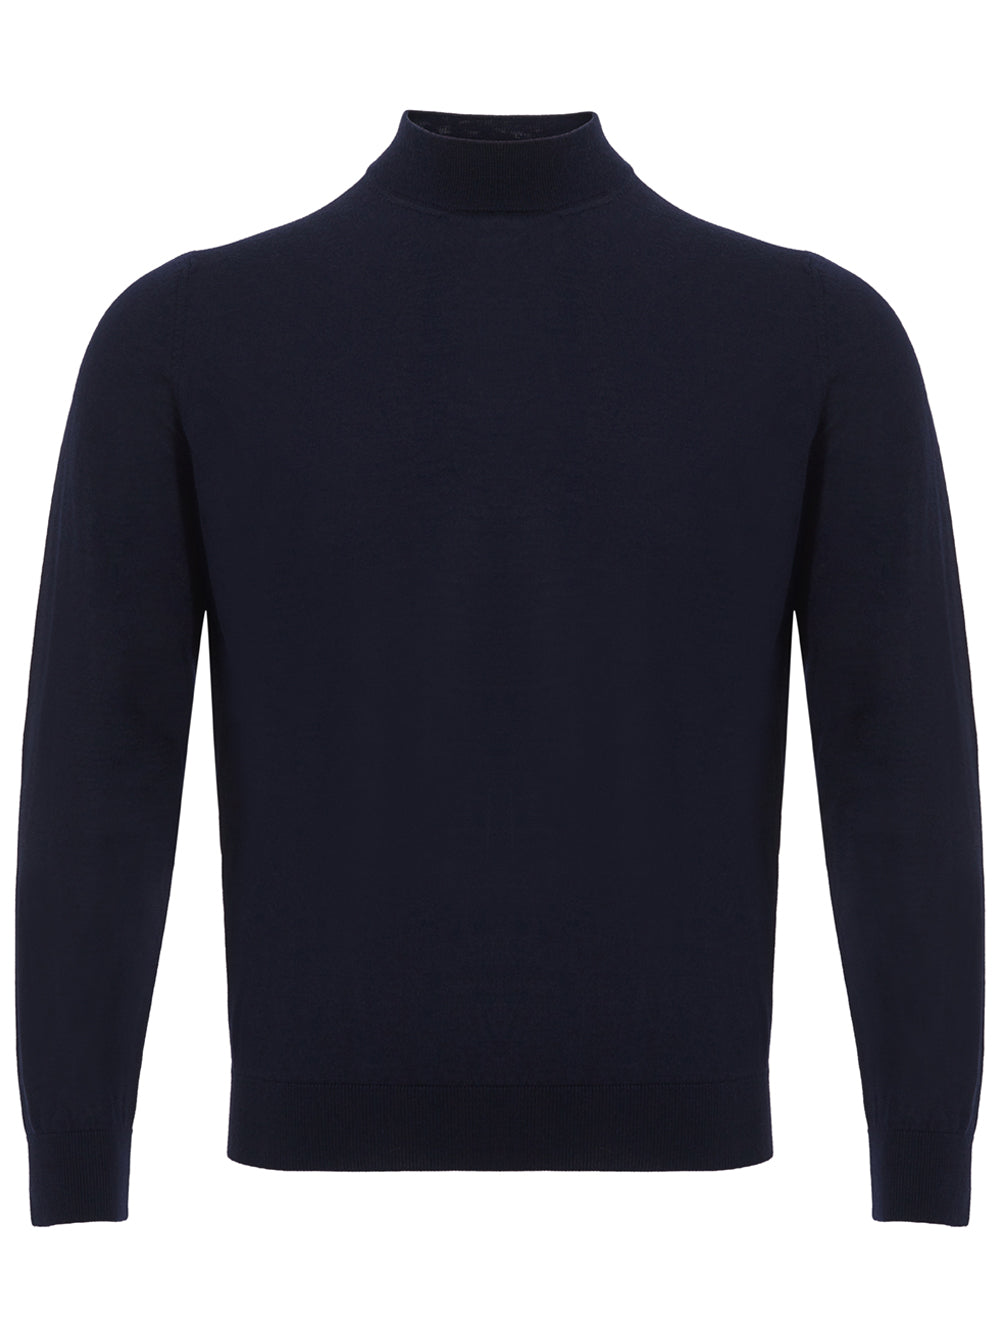 Blue turtleneck in Colombo Cashmere and Silk